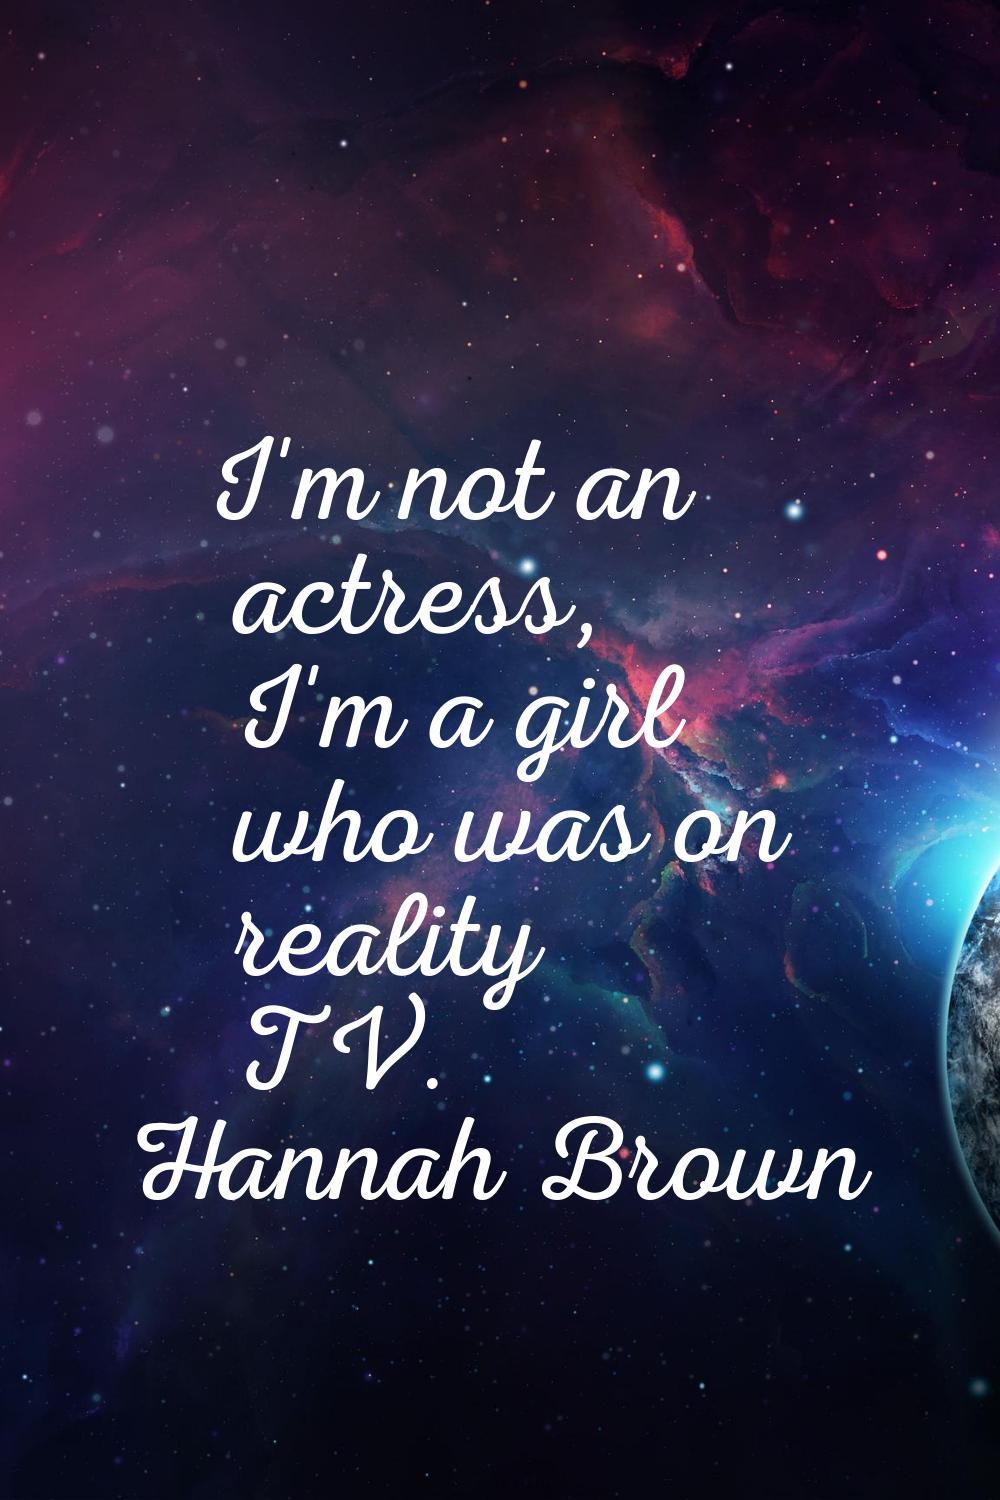 I'm not an actress, I'm a girl who was on reality TV.